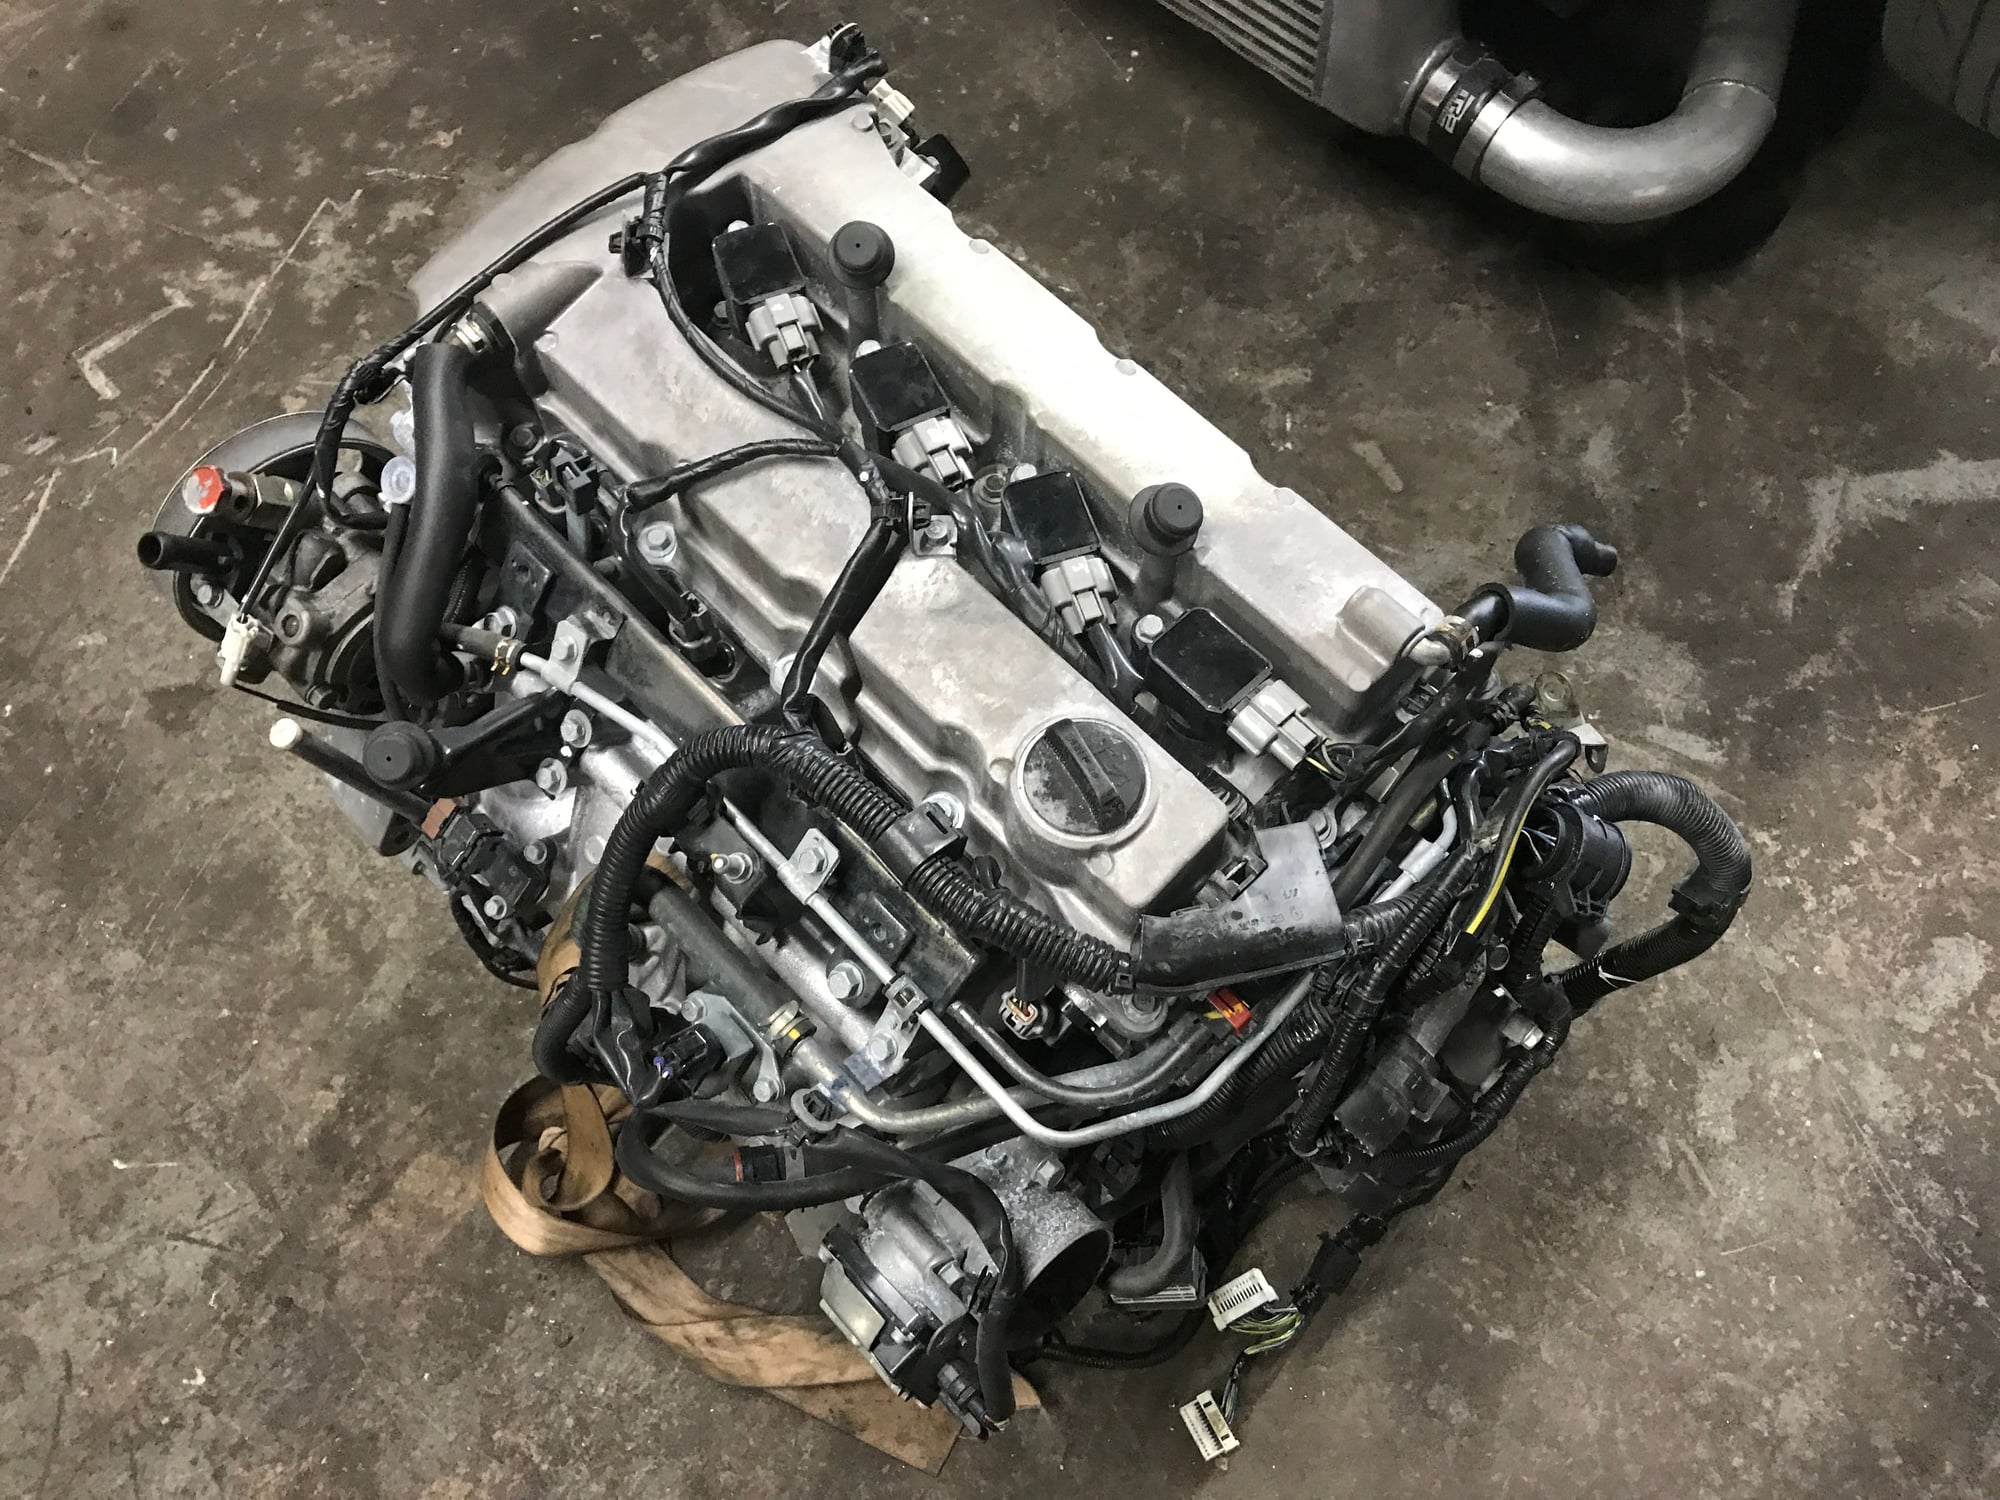 Engine - Complete - 4b11t evo x complete long block w/ harness and accessories - Used - Hollywood, FL 33024, United States